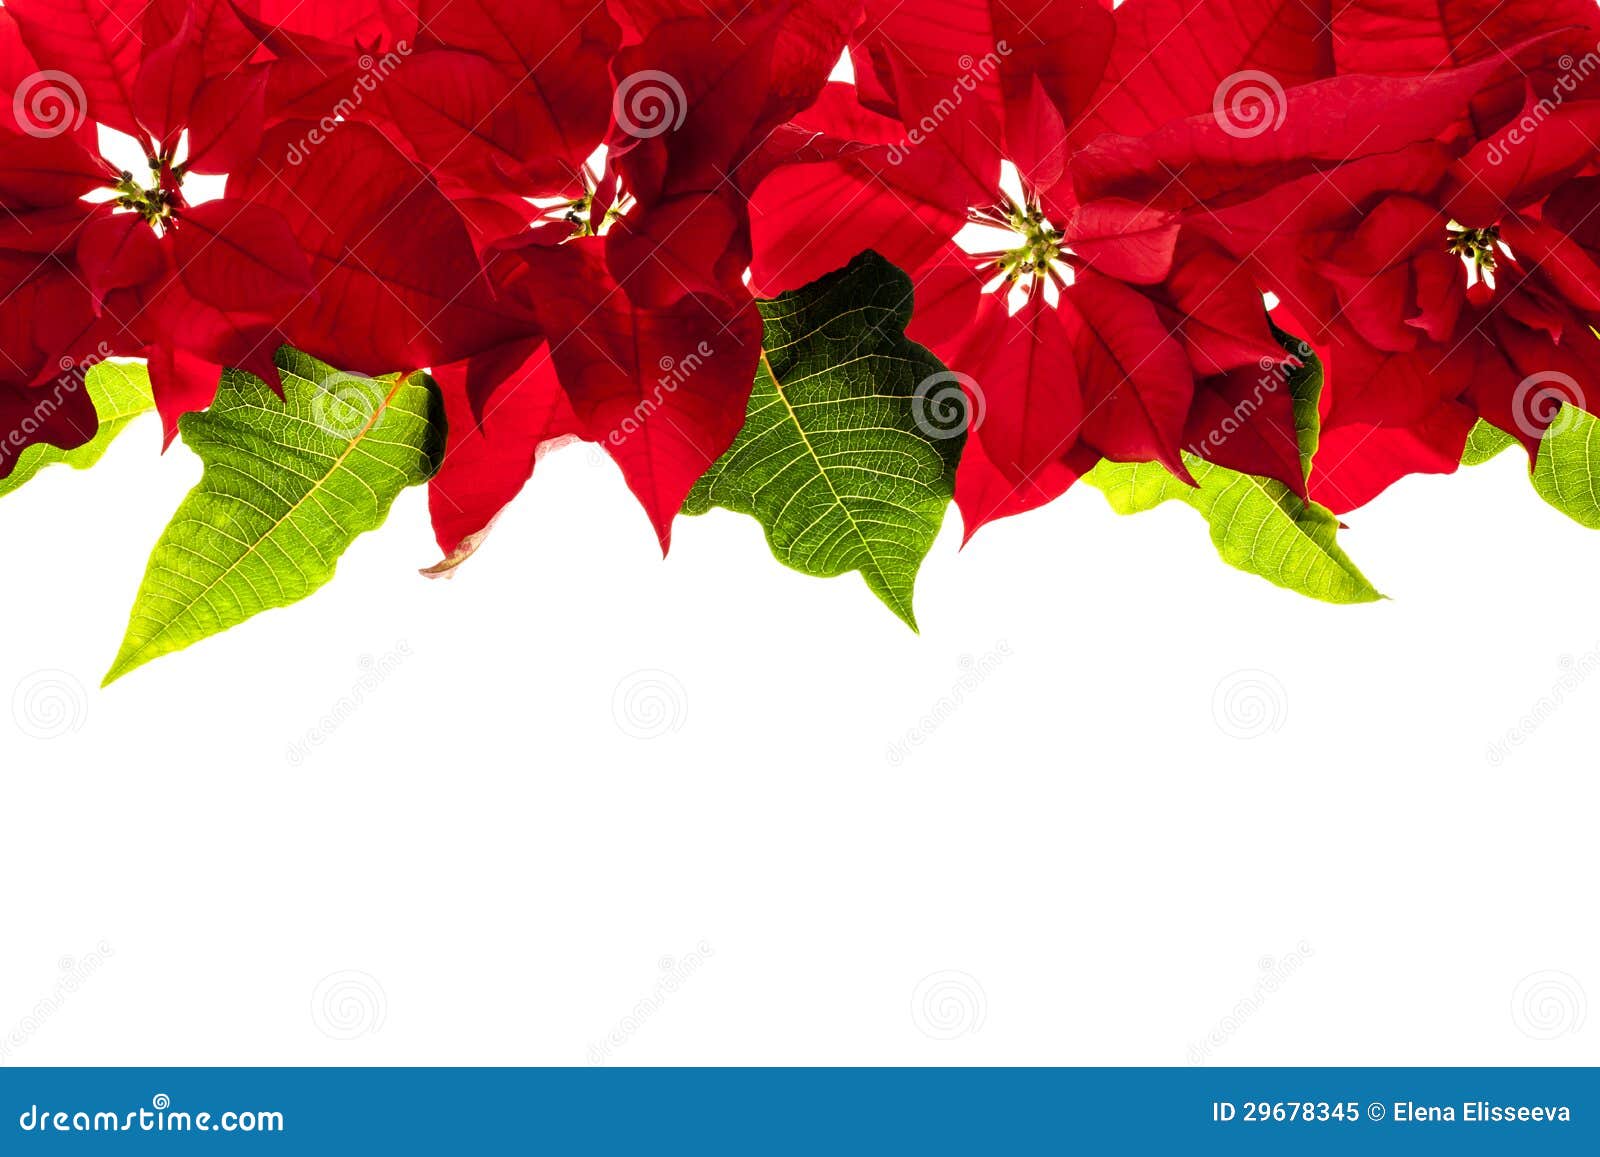 Christmas Border With Red Poinsettias Royalty Free Stock Photo - Image ...